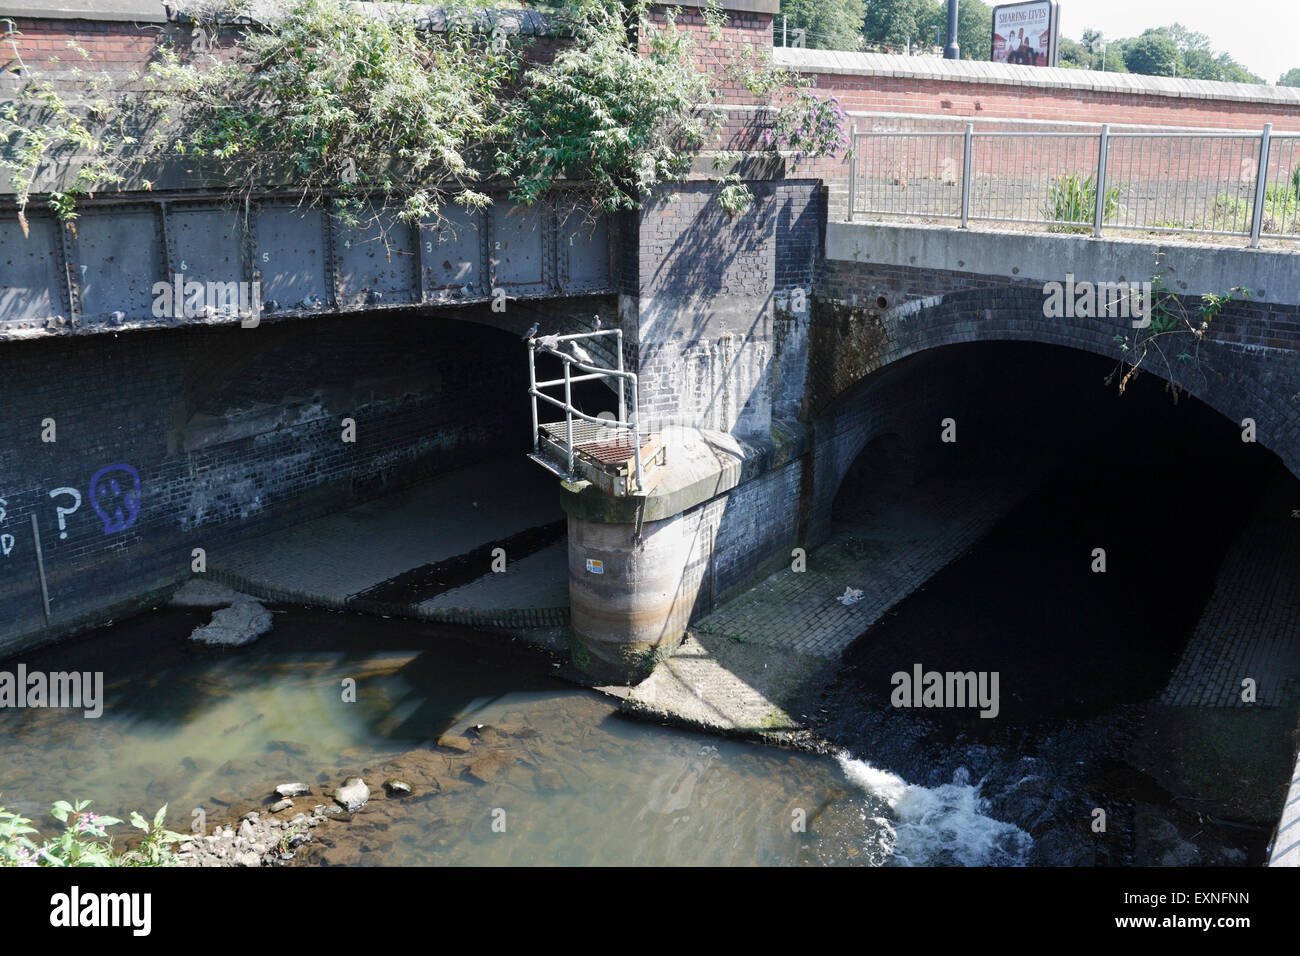 River Sheaf Tunnel Megatron entrance in Sheffield England under the railway station, Ponds Forge Culvert Stock Photo